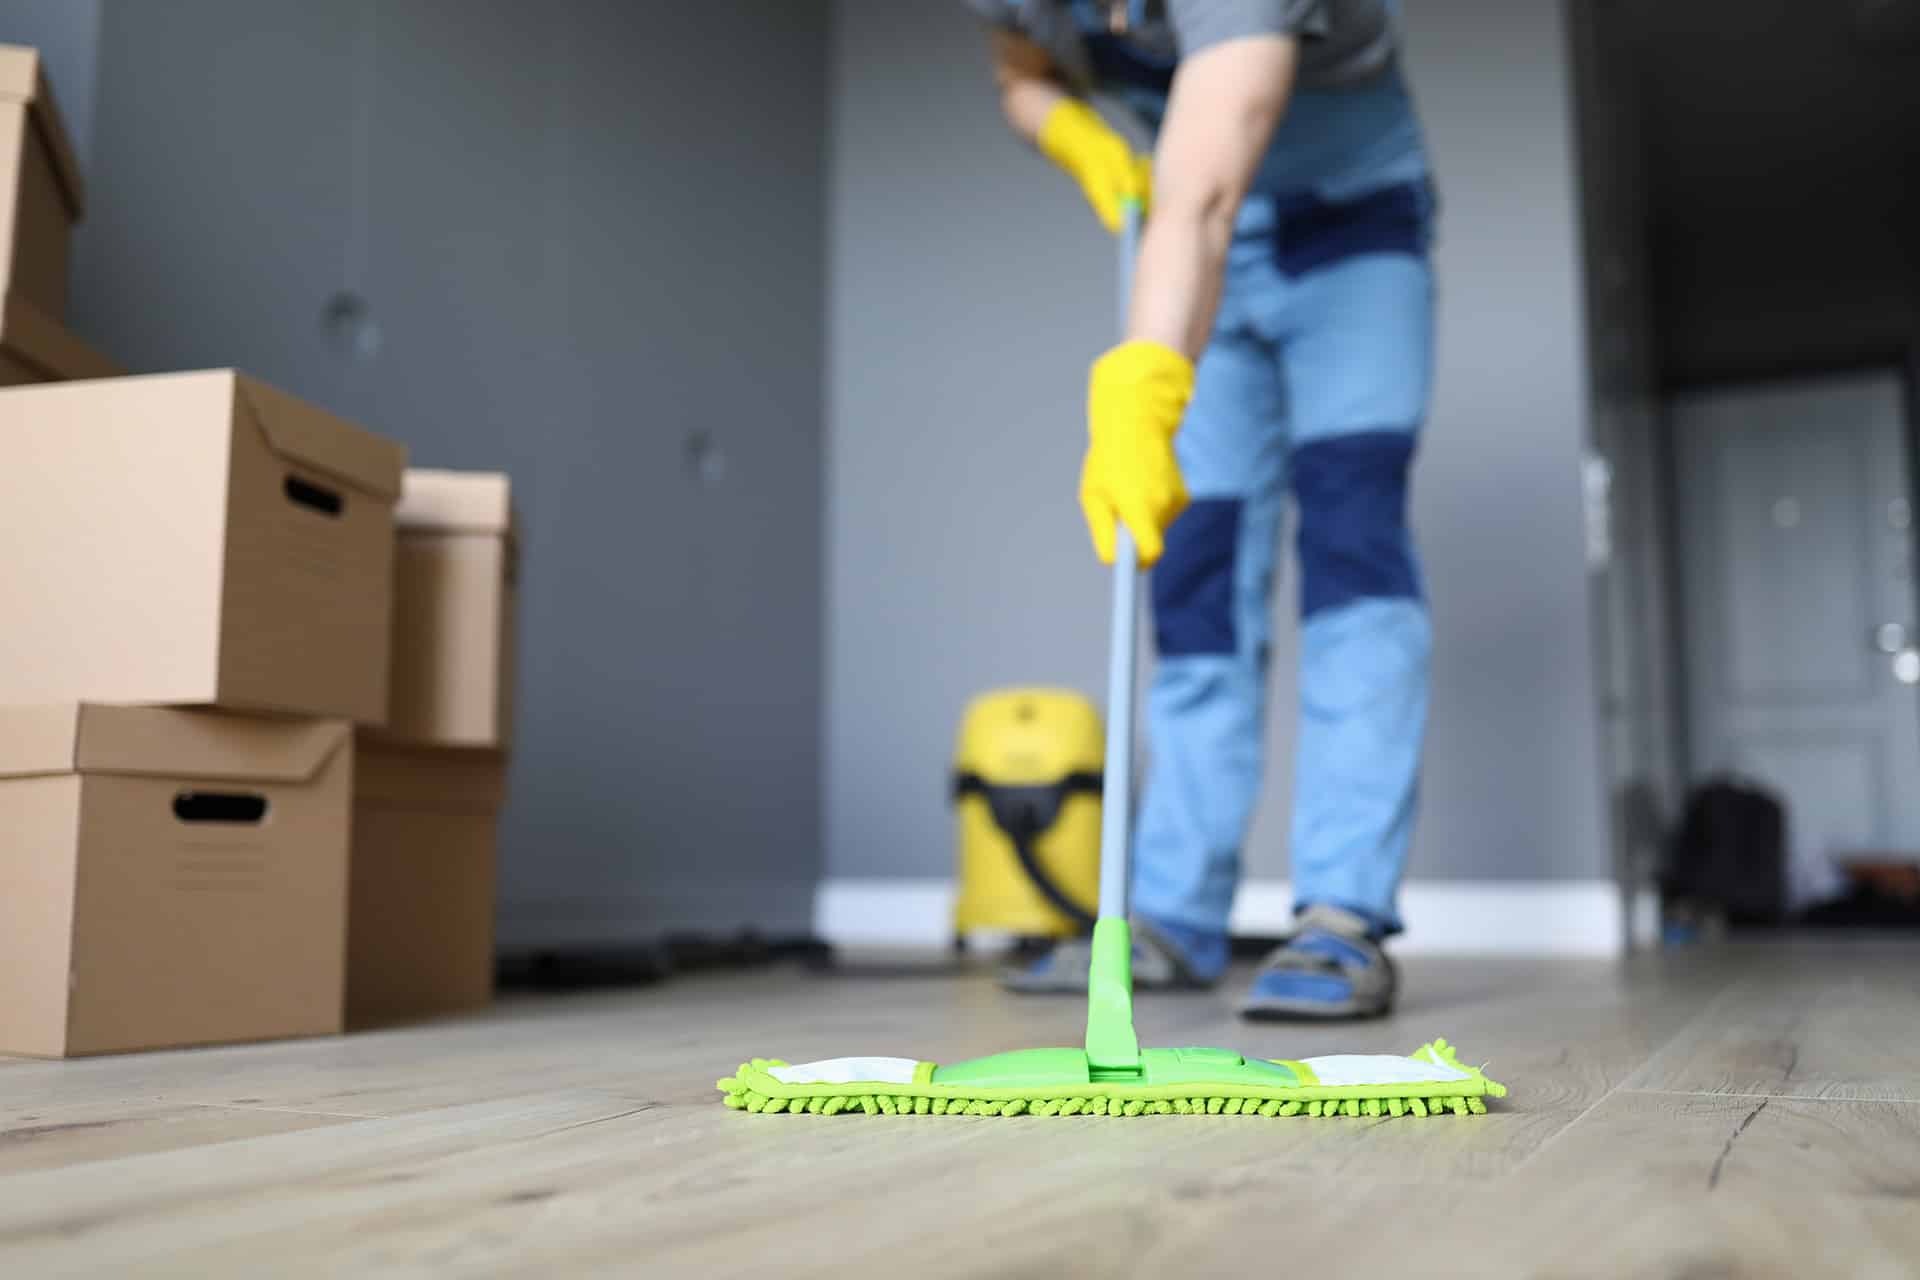 Moving cleaning services